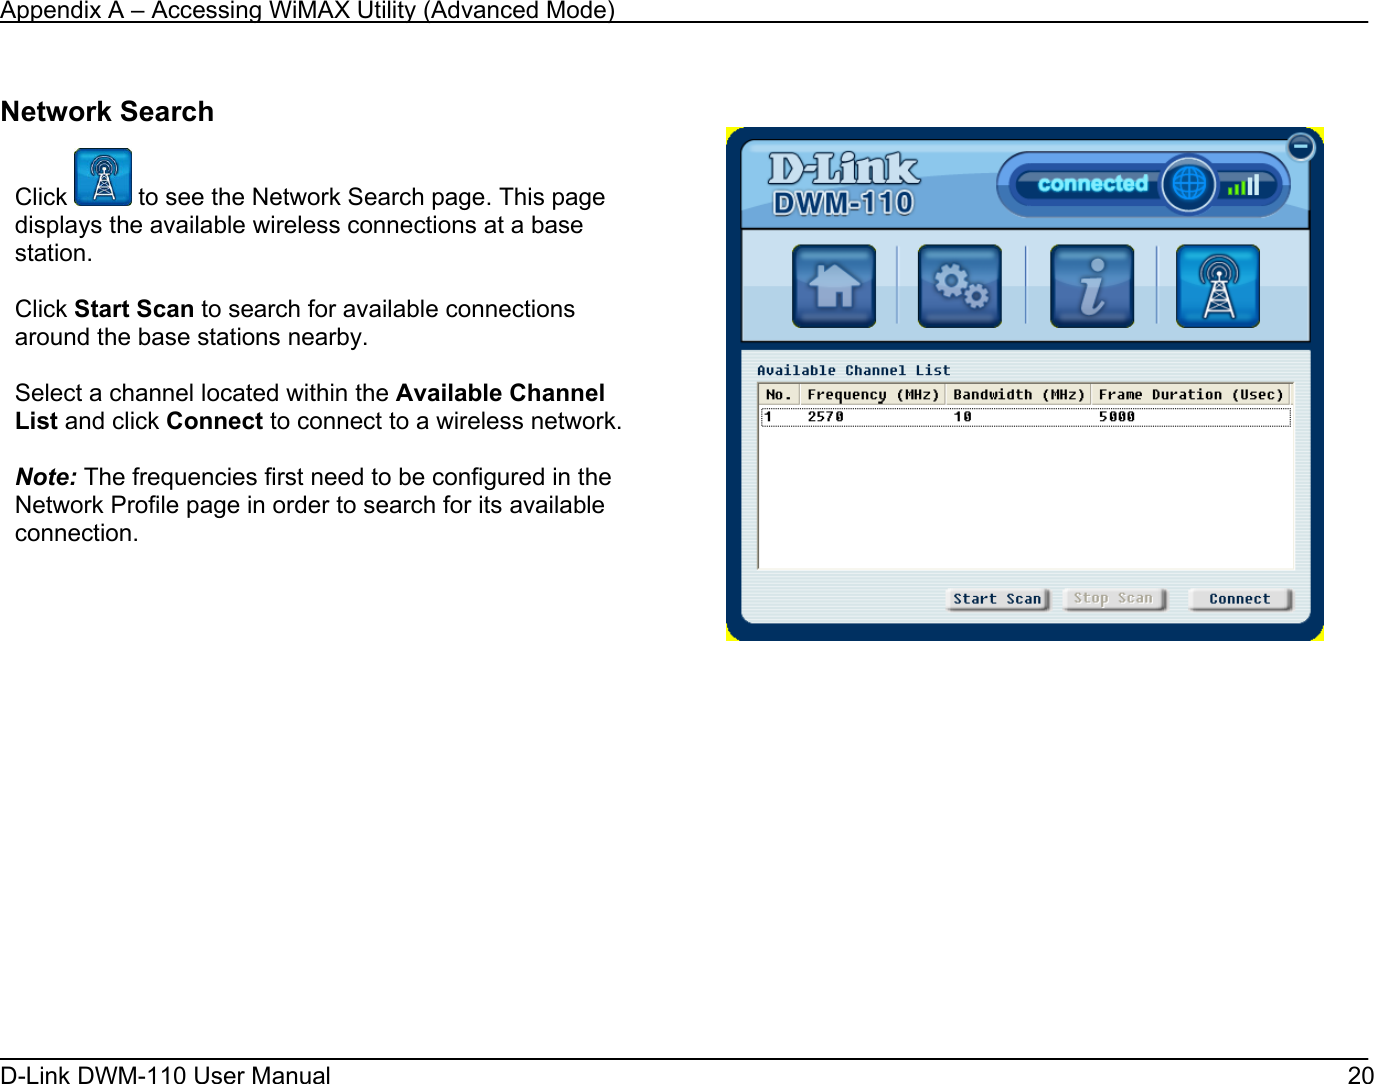 Appendix A – Accessing WiMAX Utility (Advanced Mode) D-Link DWM-110 User Manual   20  Network Search              Click   to see the Network Search page. This page displays the available wireless connections at a base station.  Click Start Scan to search for available connections around the base stations nearby.   Select a channel located within the Available Channel List and click Connect to connect to a wireless network.  Note: The frequencies first need to be configured in the Network Profile page in order to search for its available connection.            